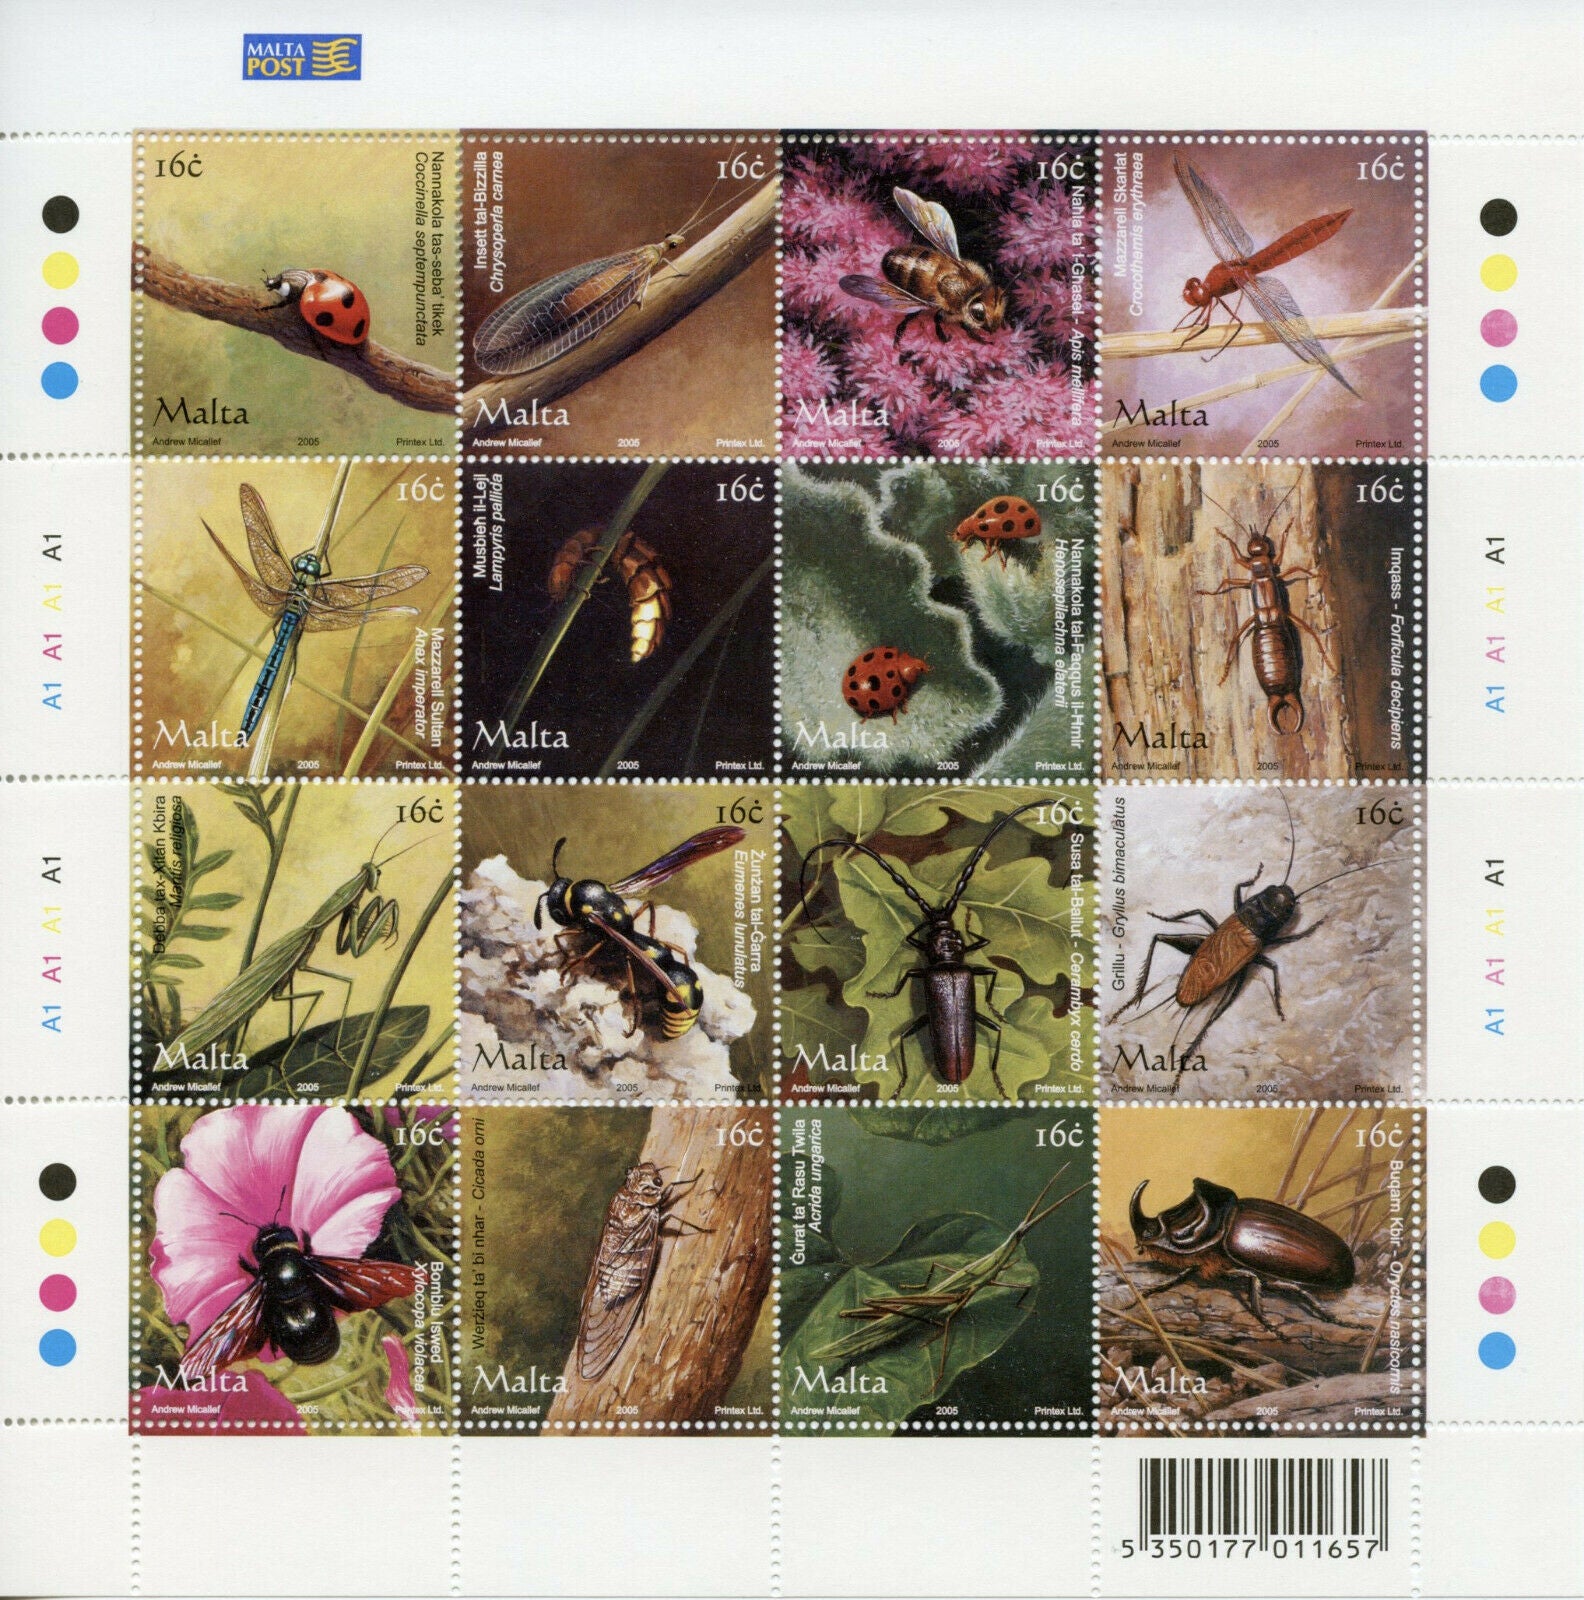 Malta Insects Stamps 2005 MNH Beetles Ladybirds Bees Dragonflies Fauna 16v M/S